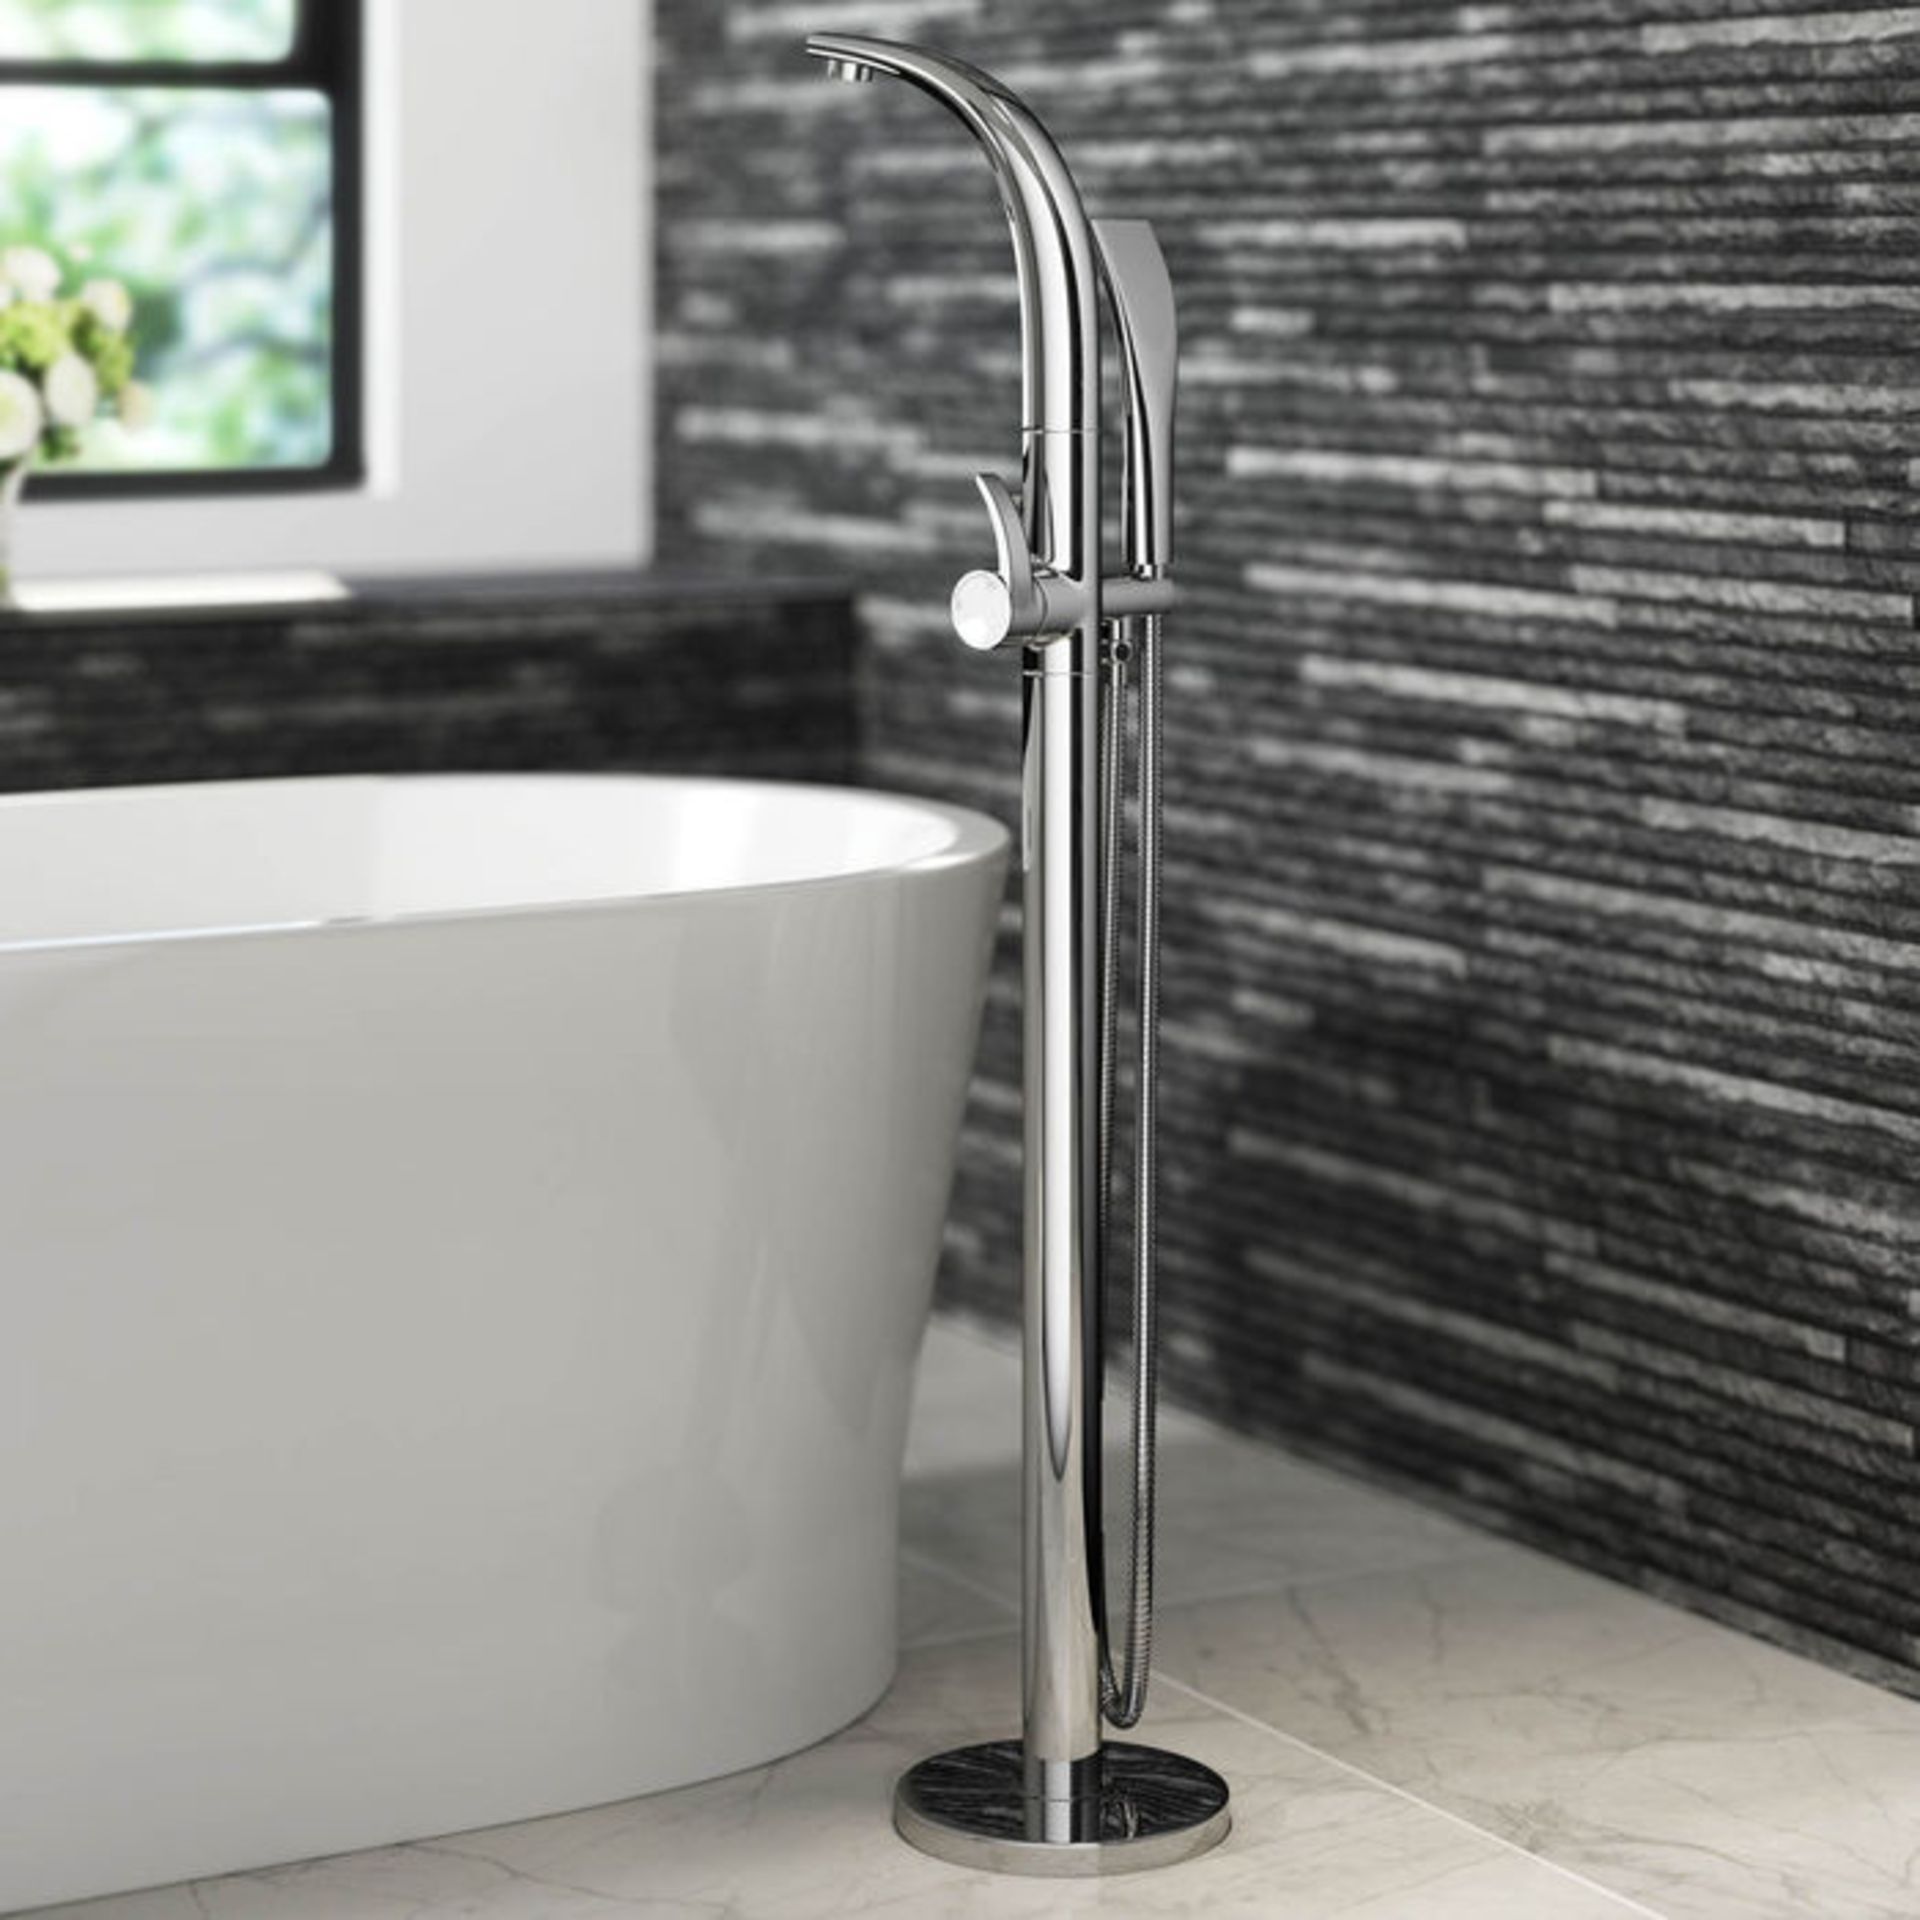 (ZZ73) Ava Freestanding Bath Mixer Tap with Hand Held Shower Head We love this because it has a